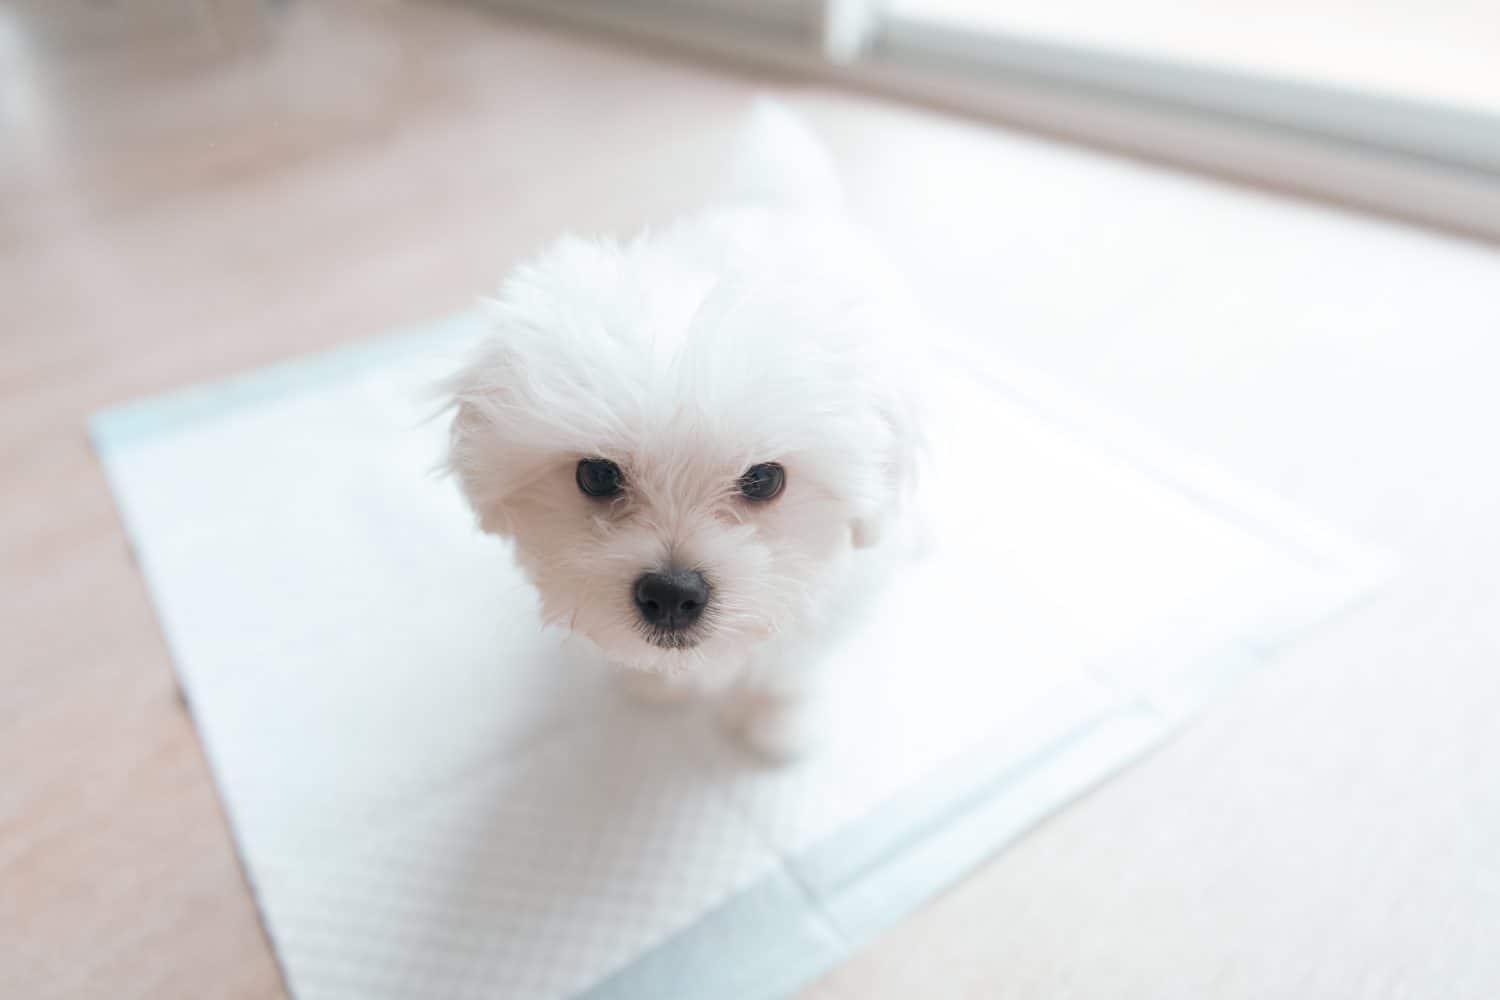 Small cute puppy of Maltese dog sitting on potty pad